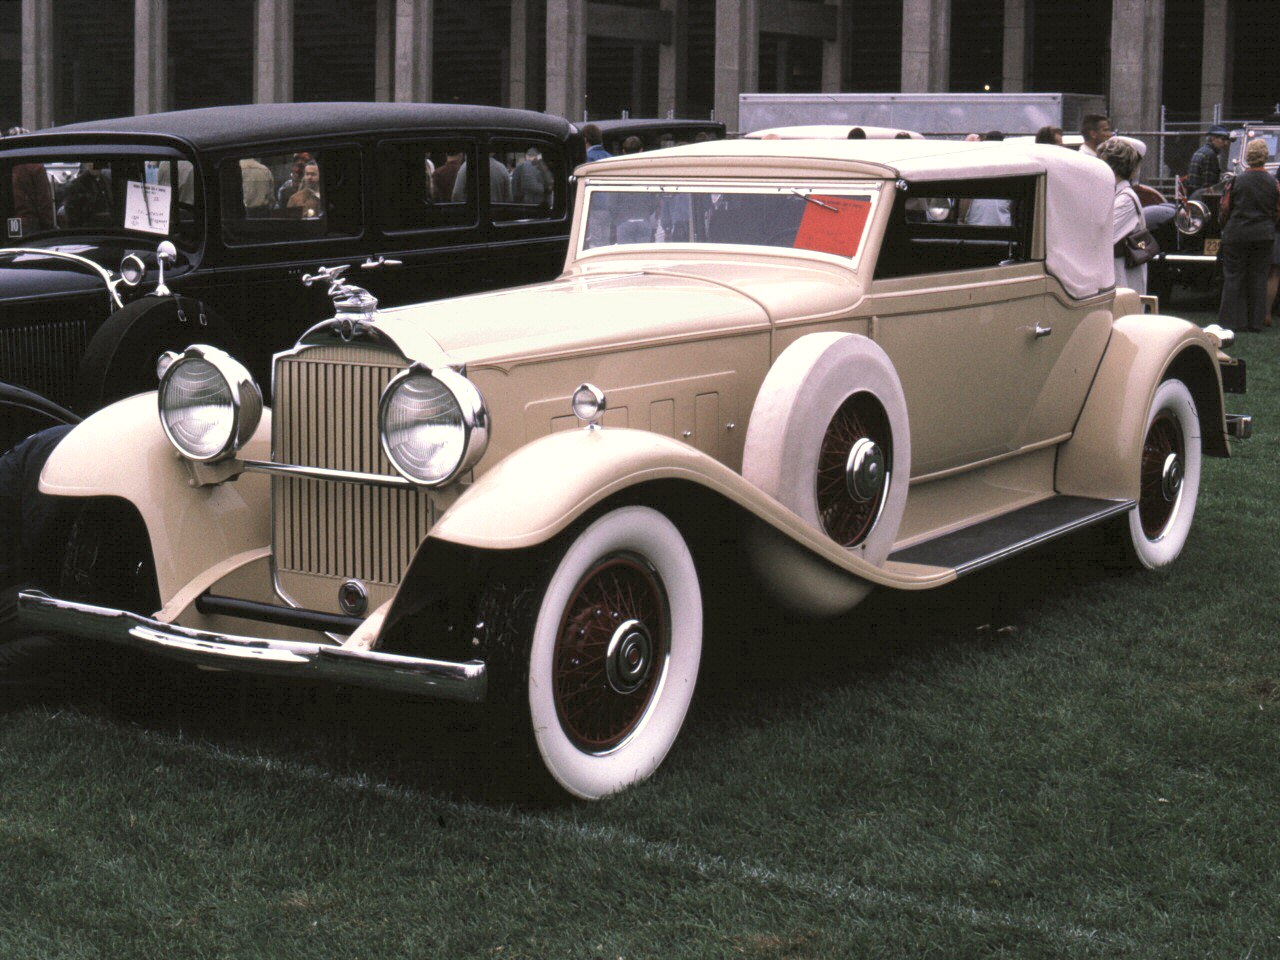 Royalty Free Image - 1930 Packard Convertible Coupe Tan Fvl 35mm ...